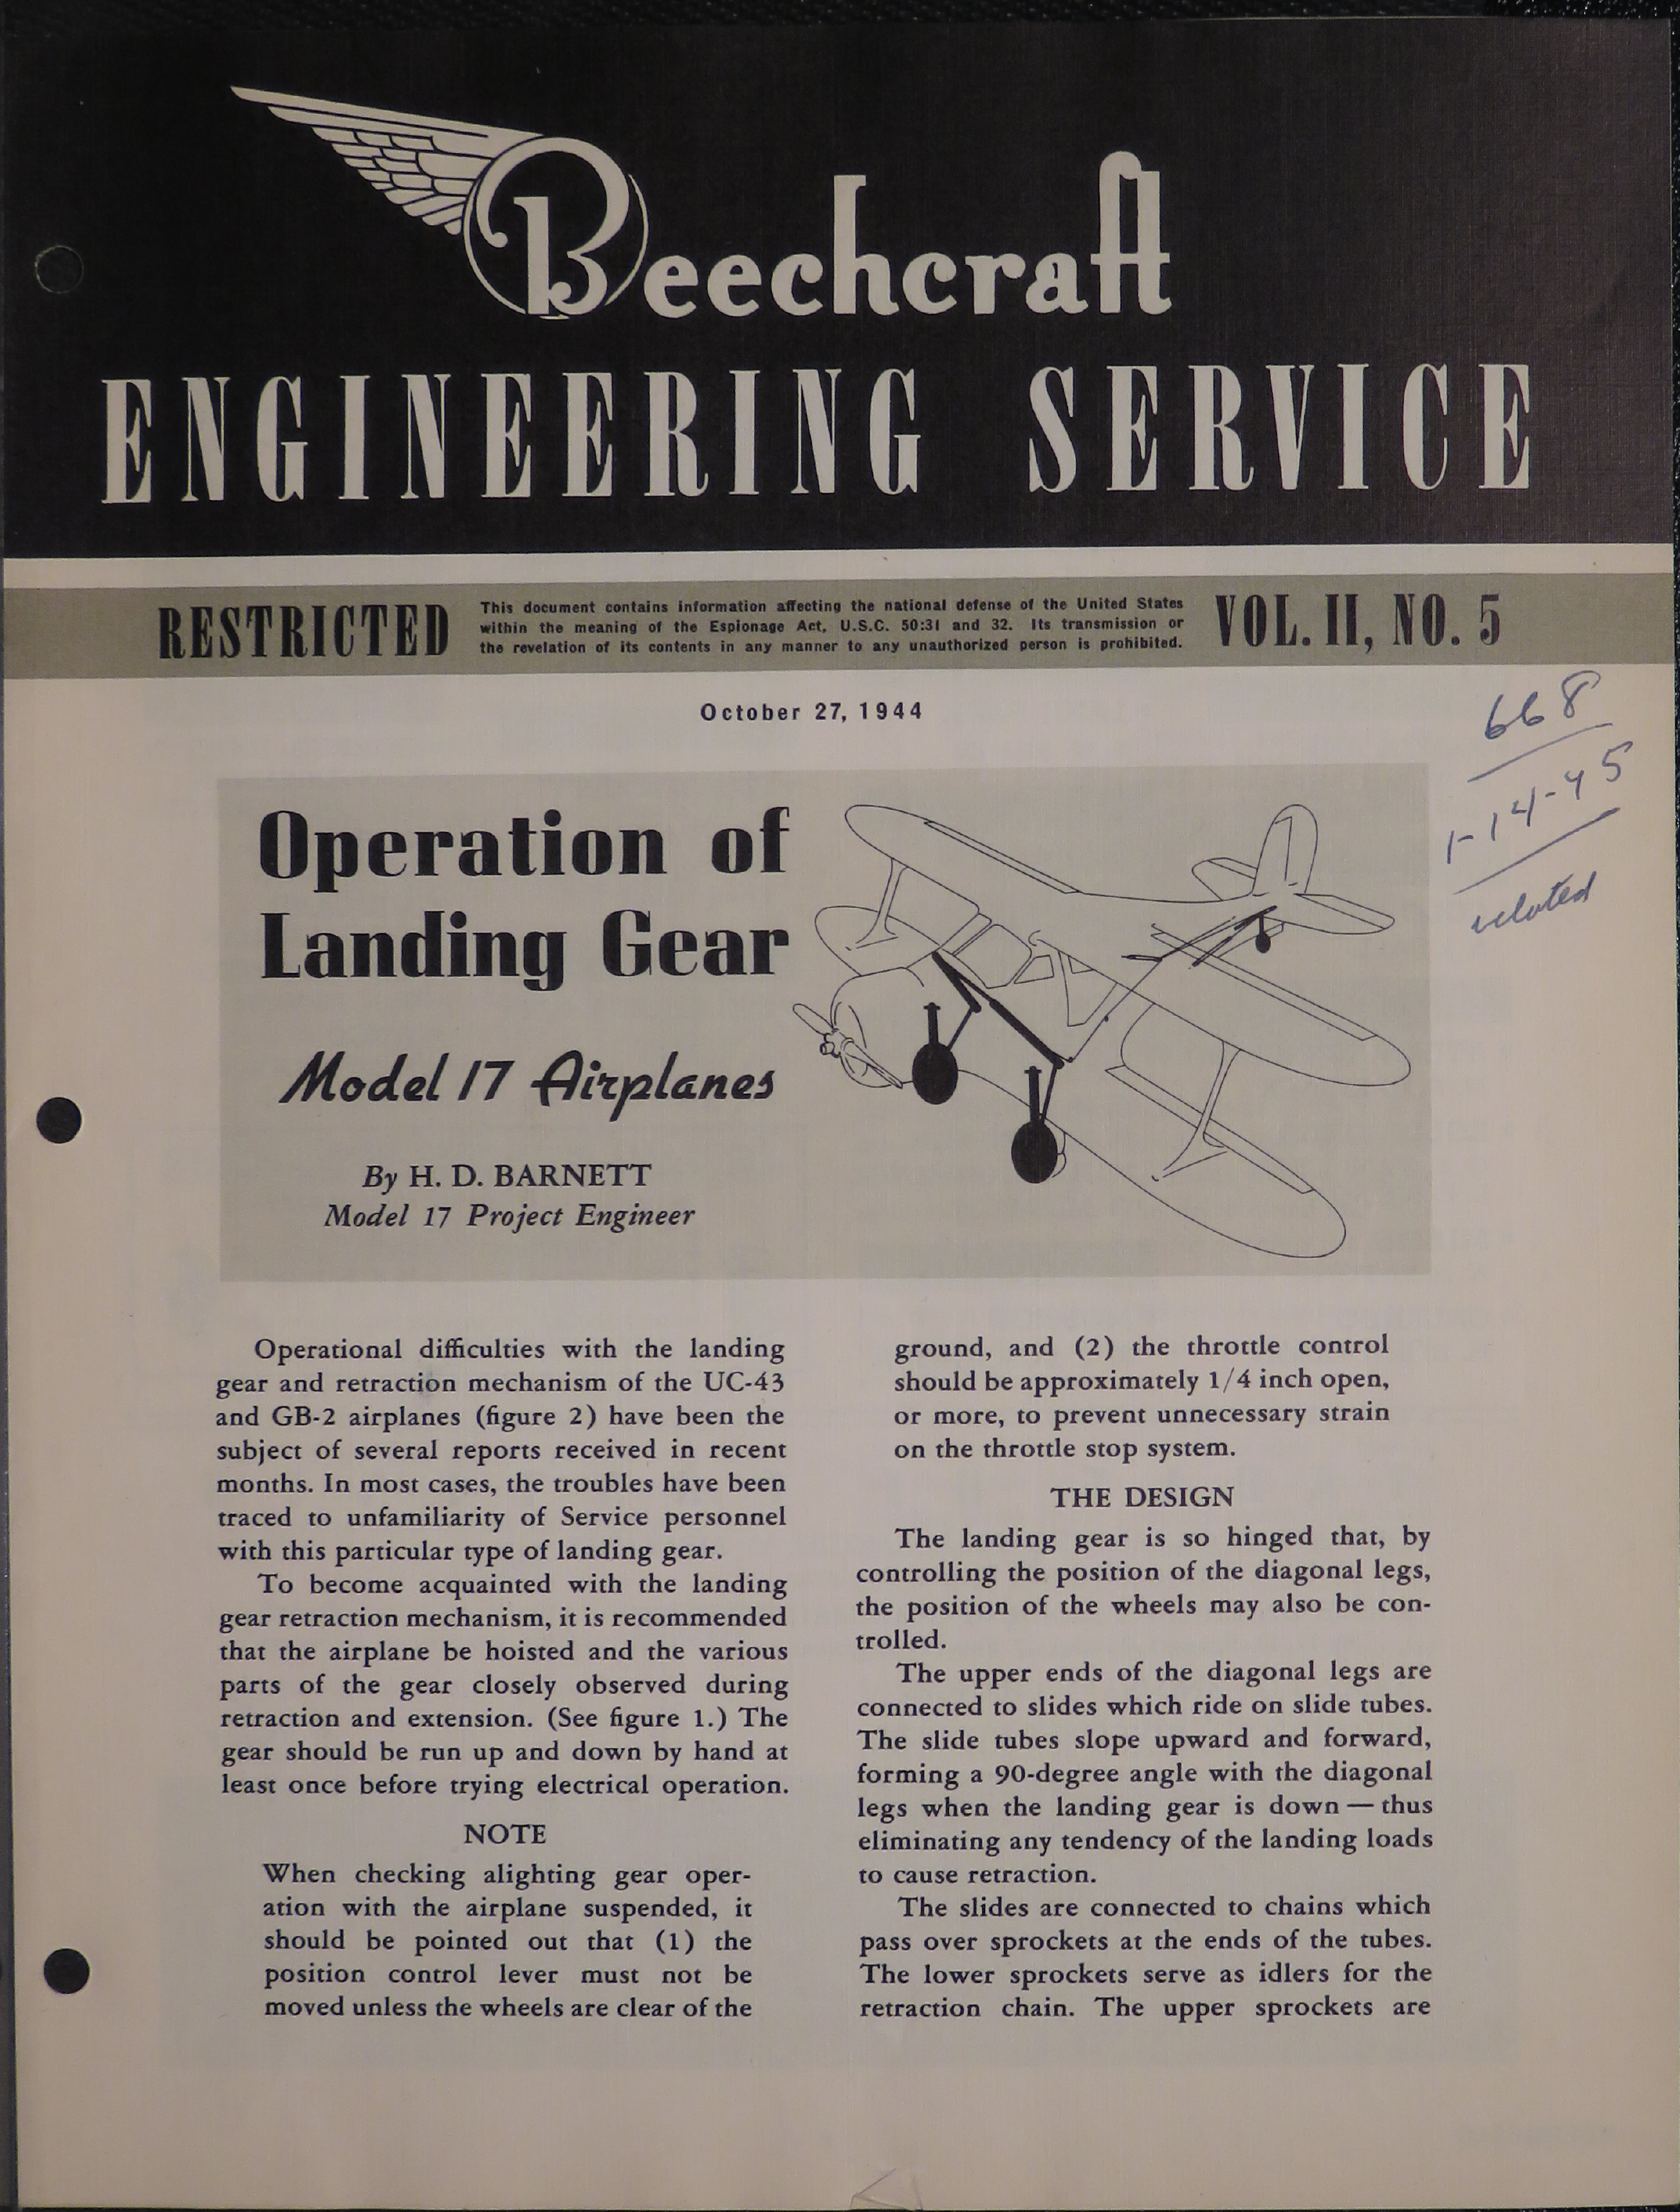 Sample page 1 from AirCorps Library document: Vol. II, No. 5 - Beechcraft Engineering Service